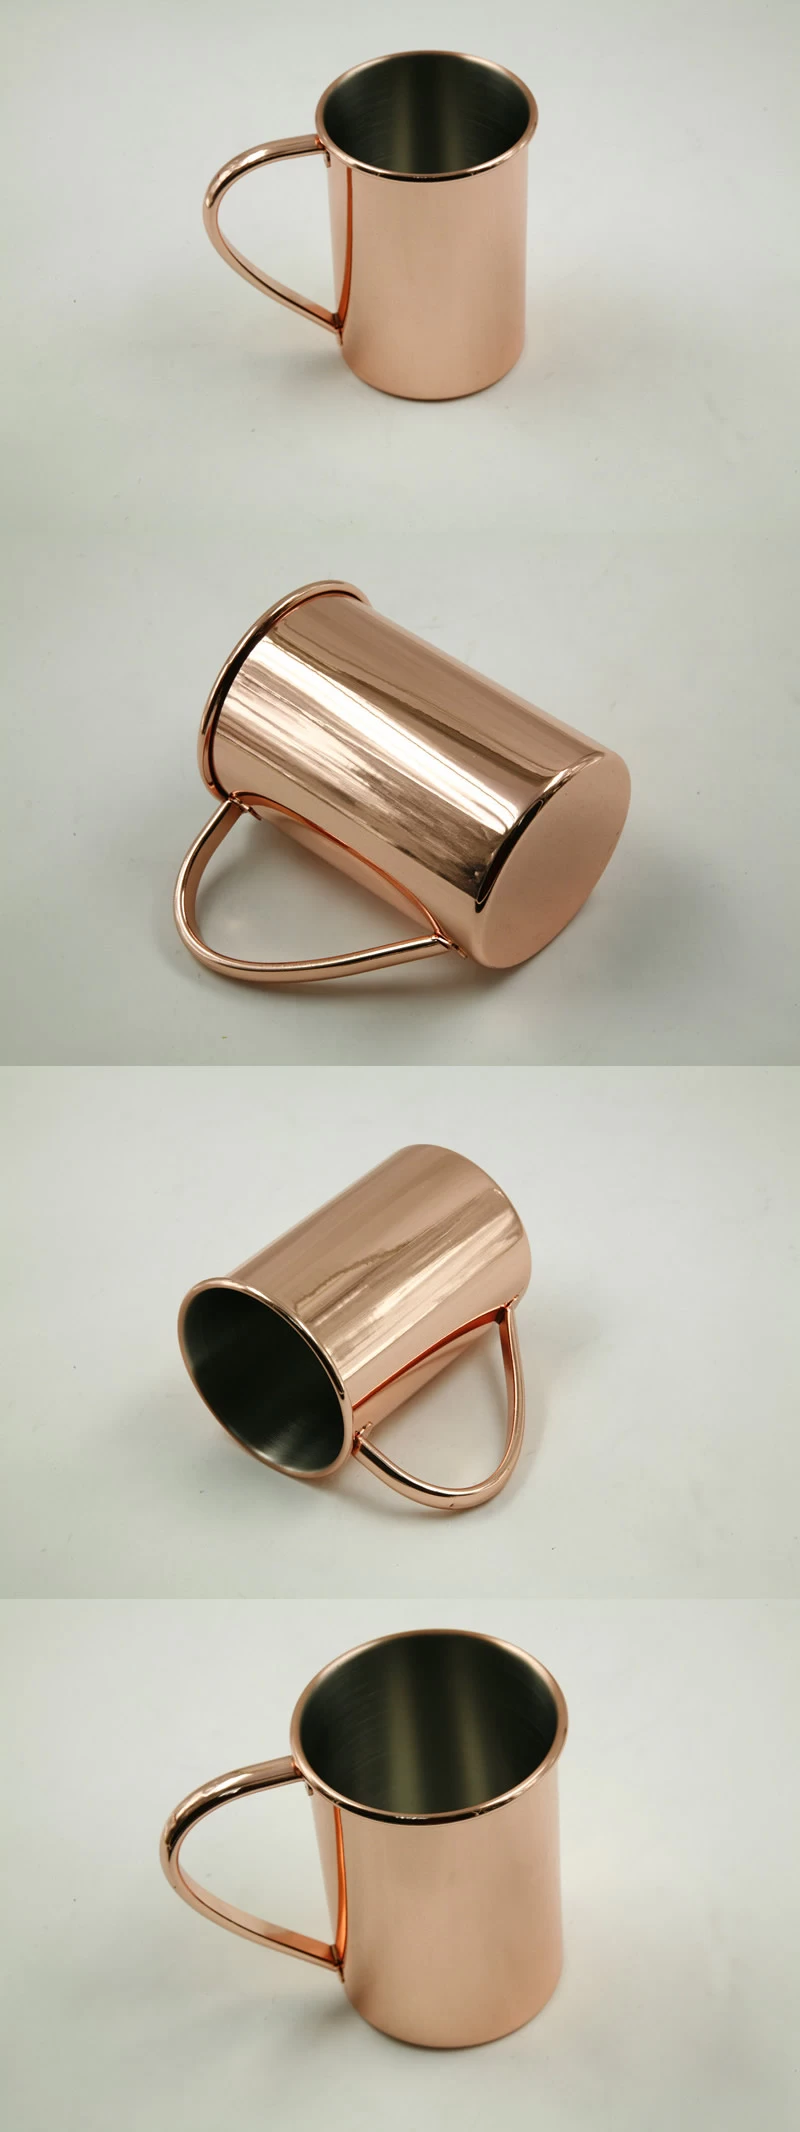 Stainless Steel copper cup